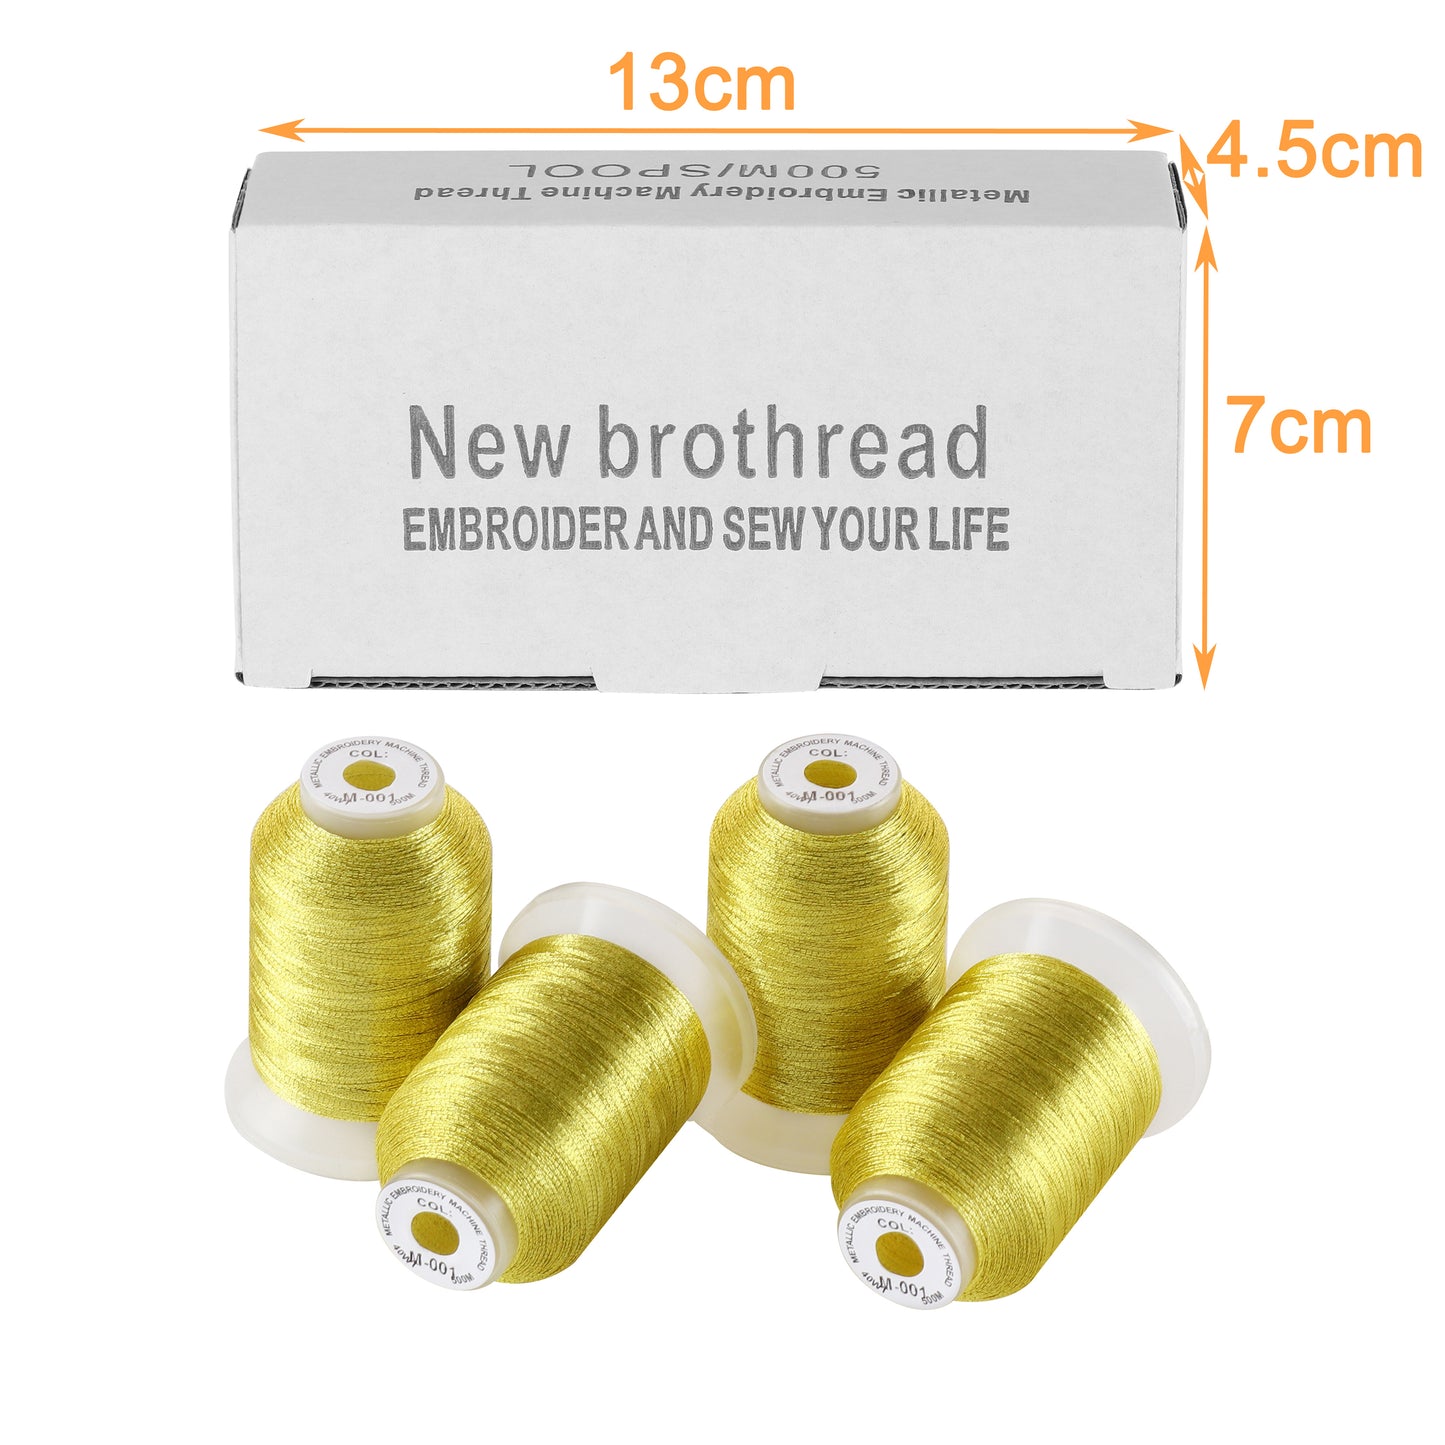 New brothread 4 Gold Metallic Embroidery Machine Thread Kit 500M (550Y) Each Spool for Computerized Embroidery and Decorative Sewing